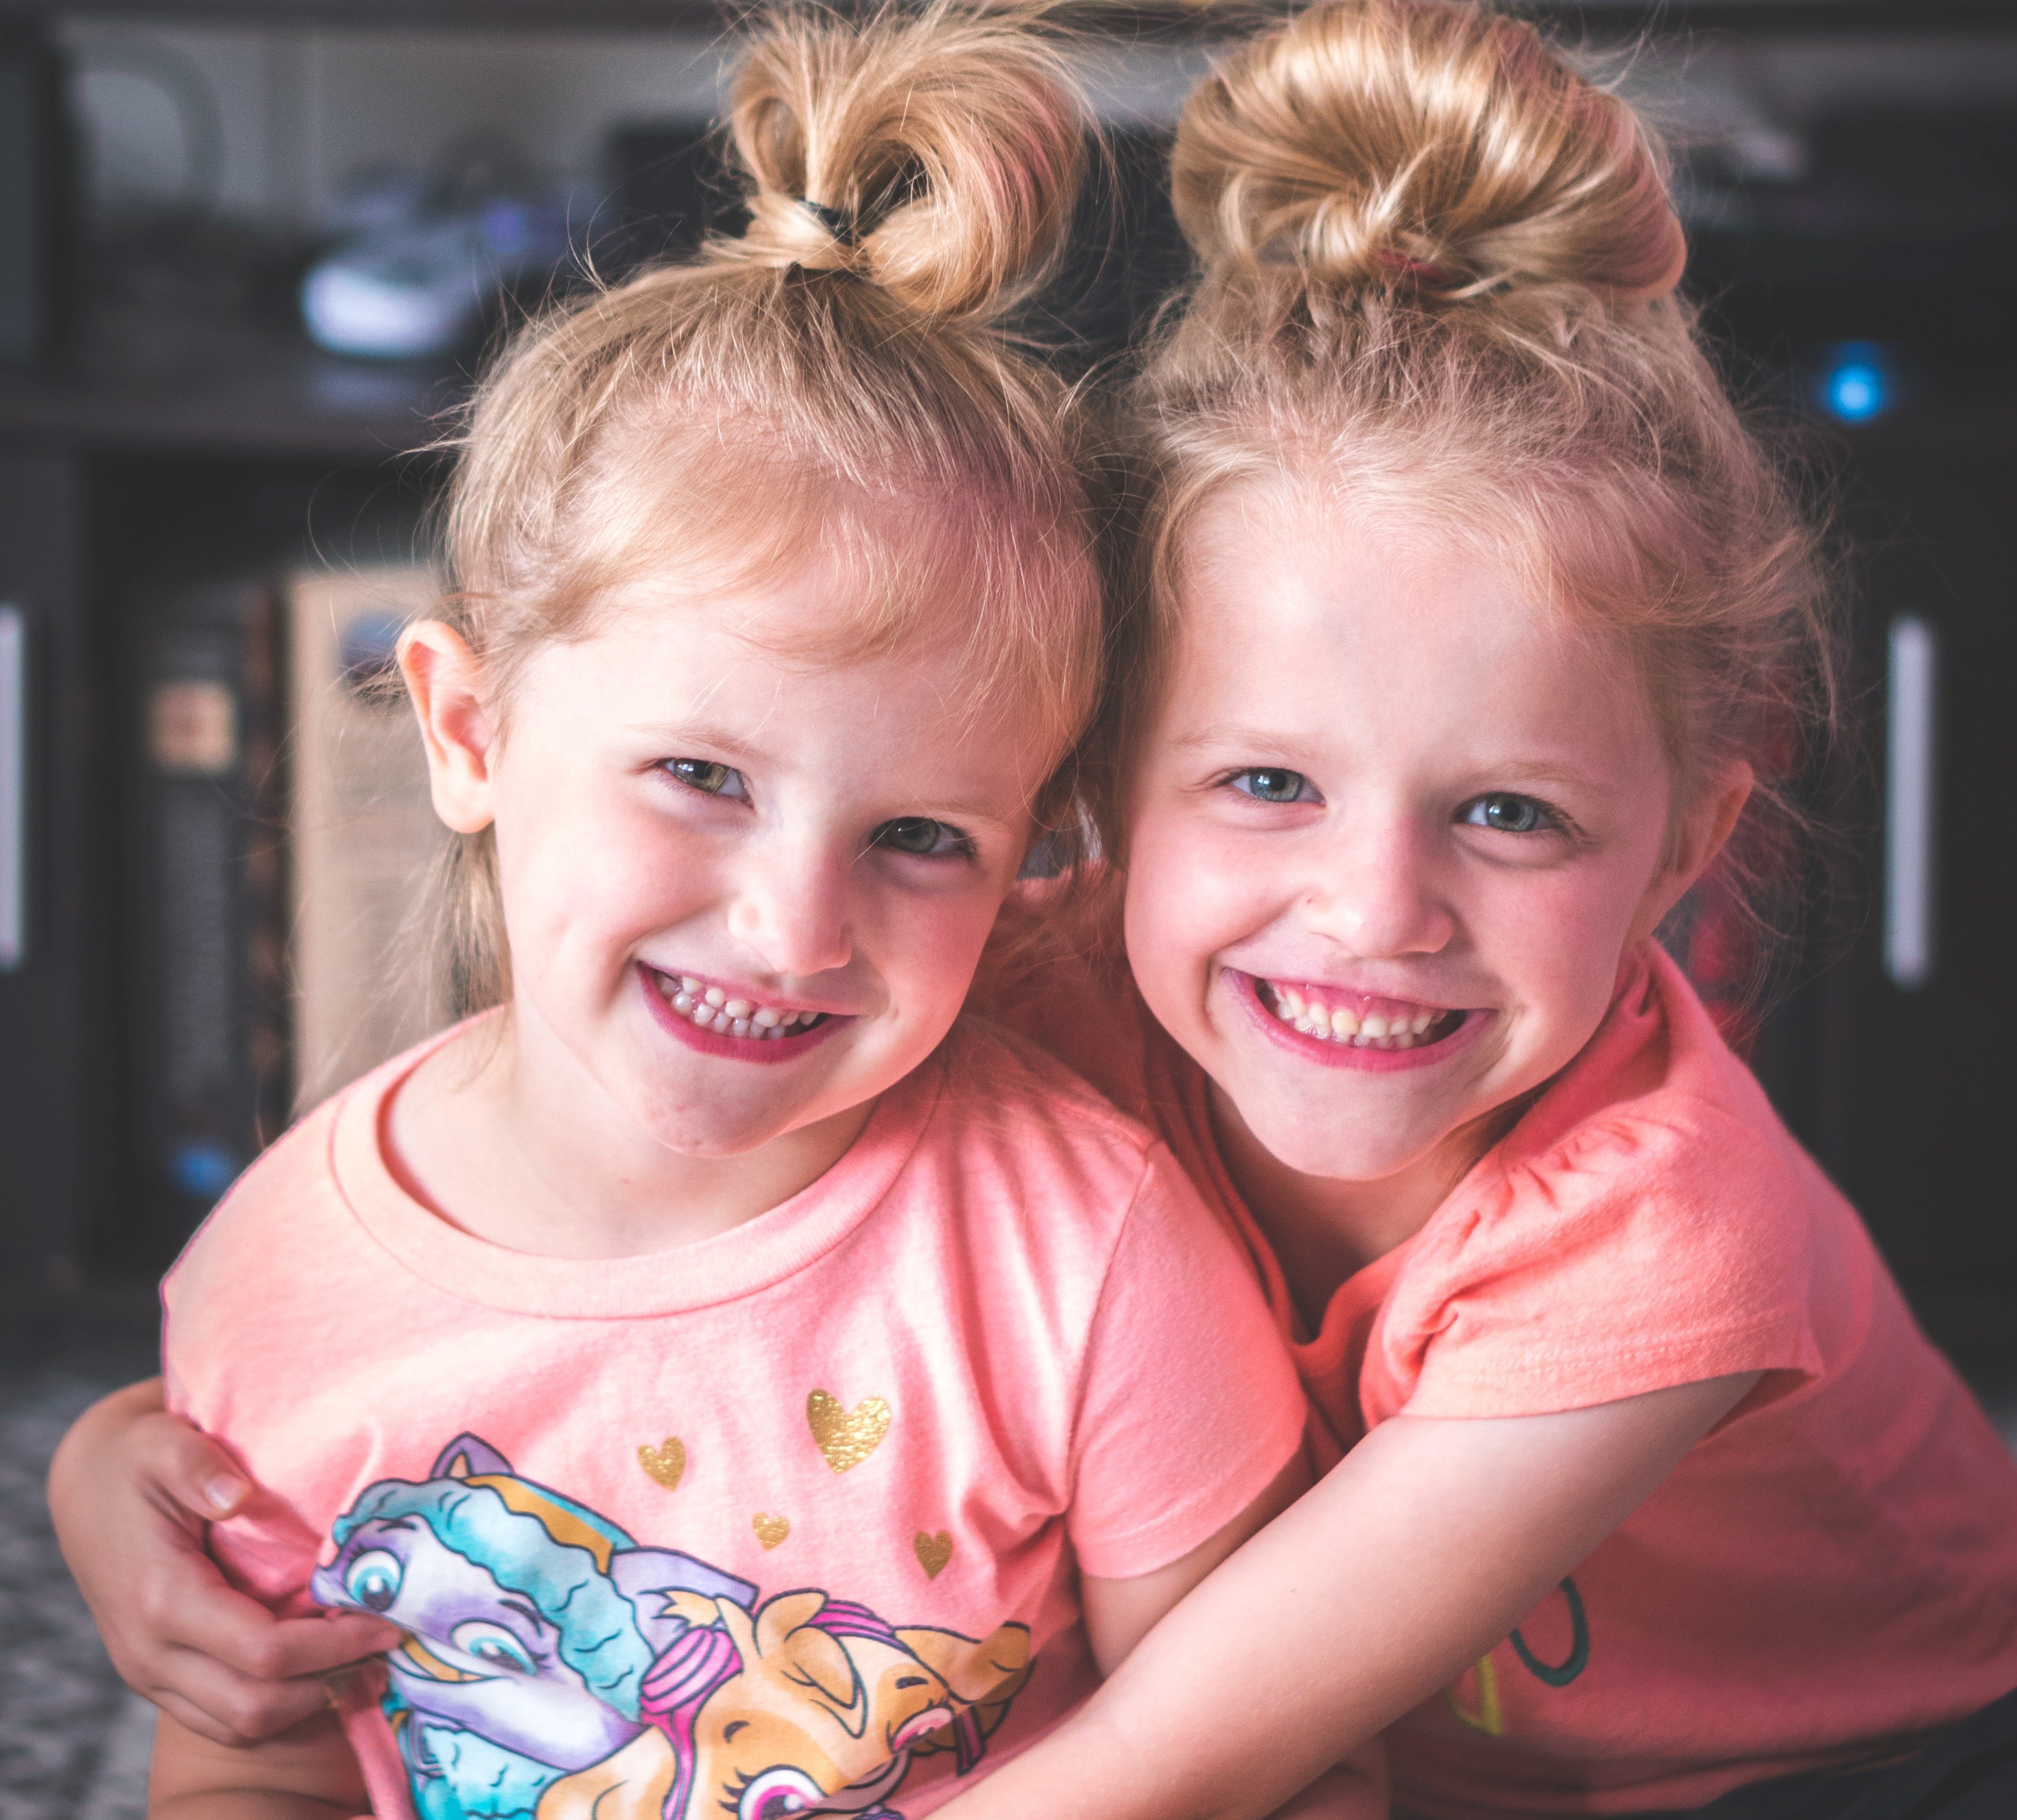 The two girls were exactly alike. | Source: Pexels